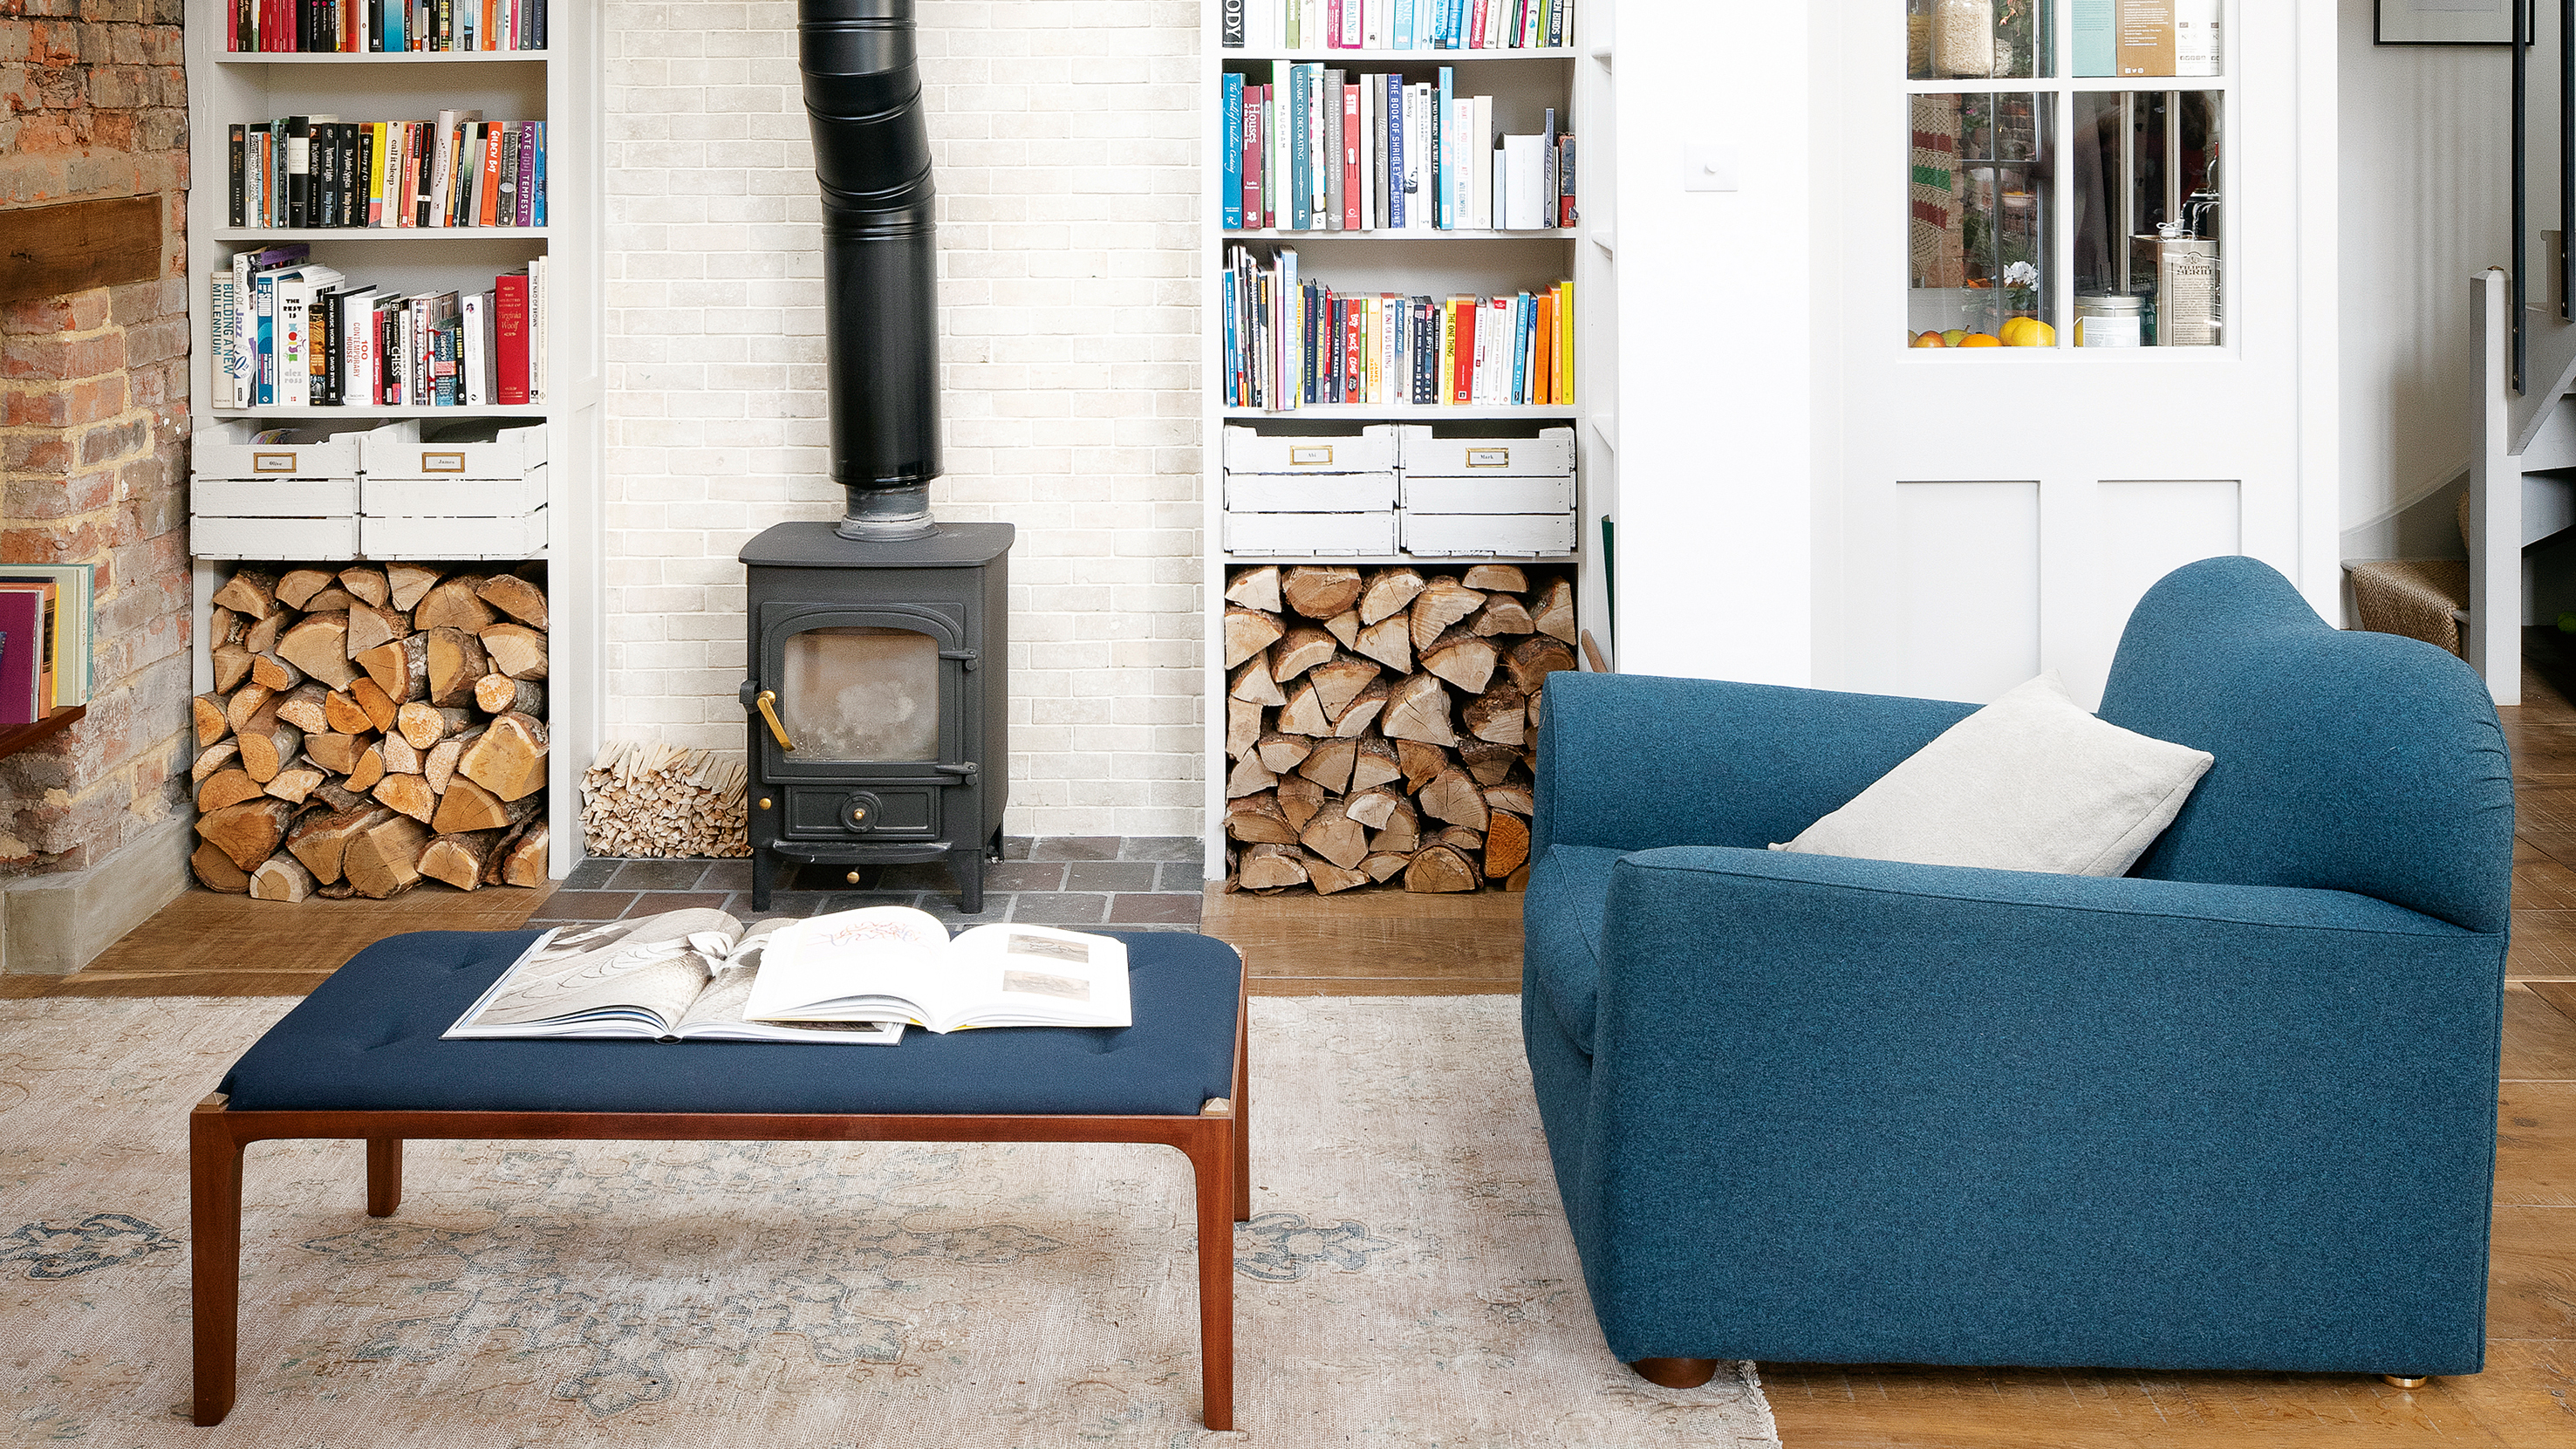 10 Wood Burner Ideas To Add Warmth And, Wood Heater Surround Ideas